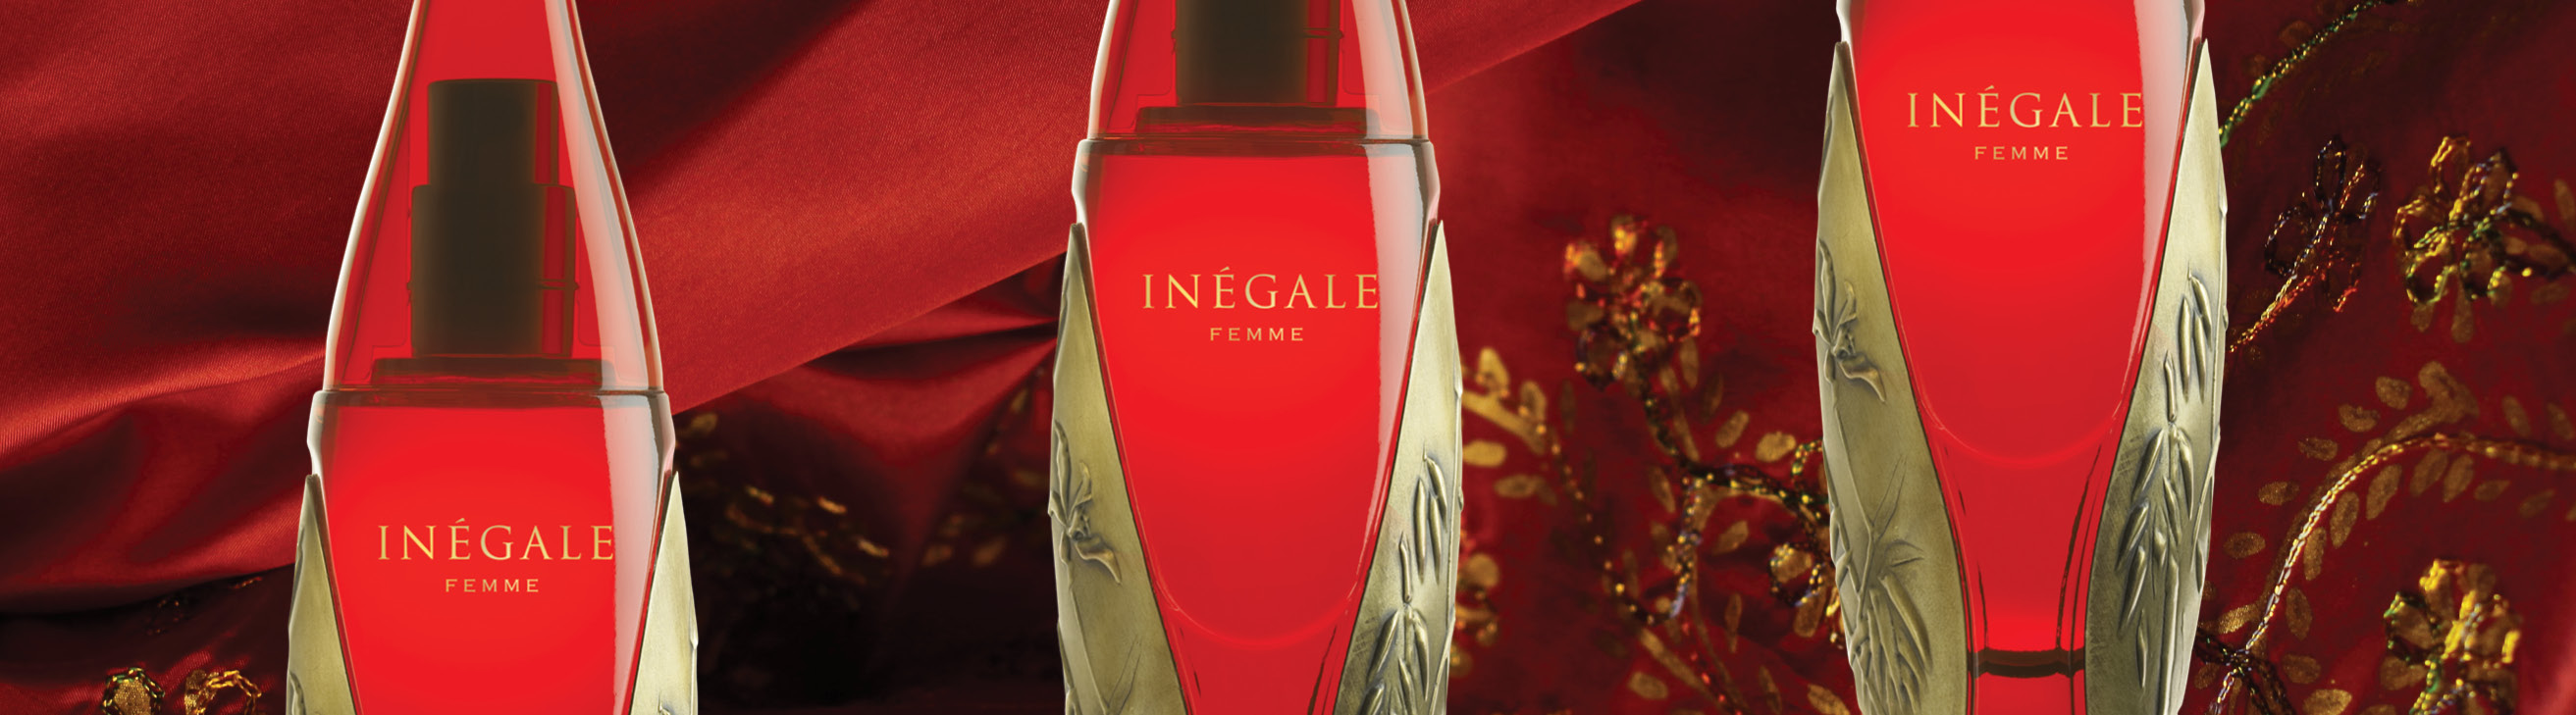 Category Banner Fragrance Ineagle